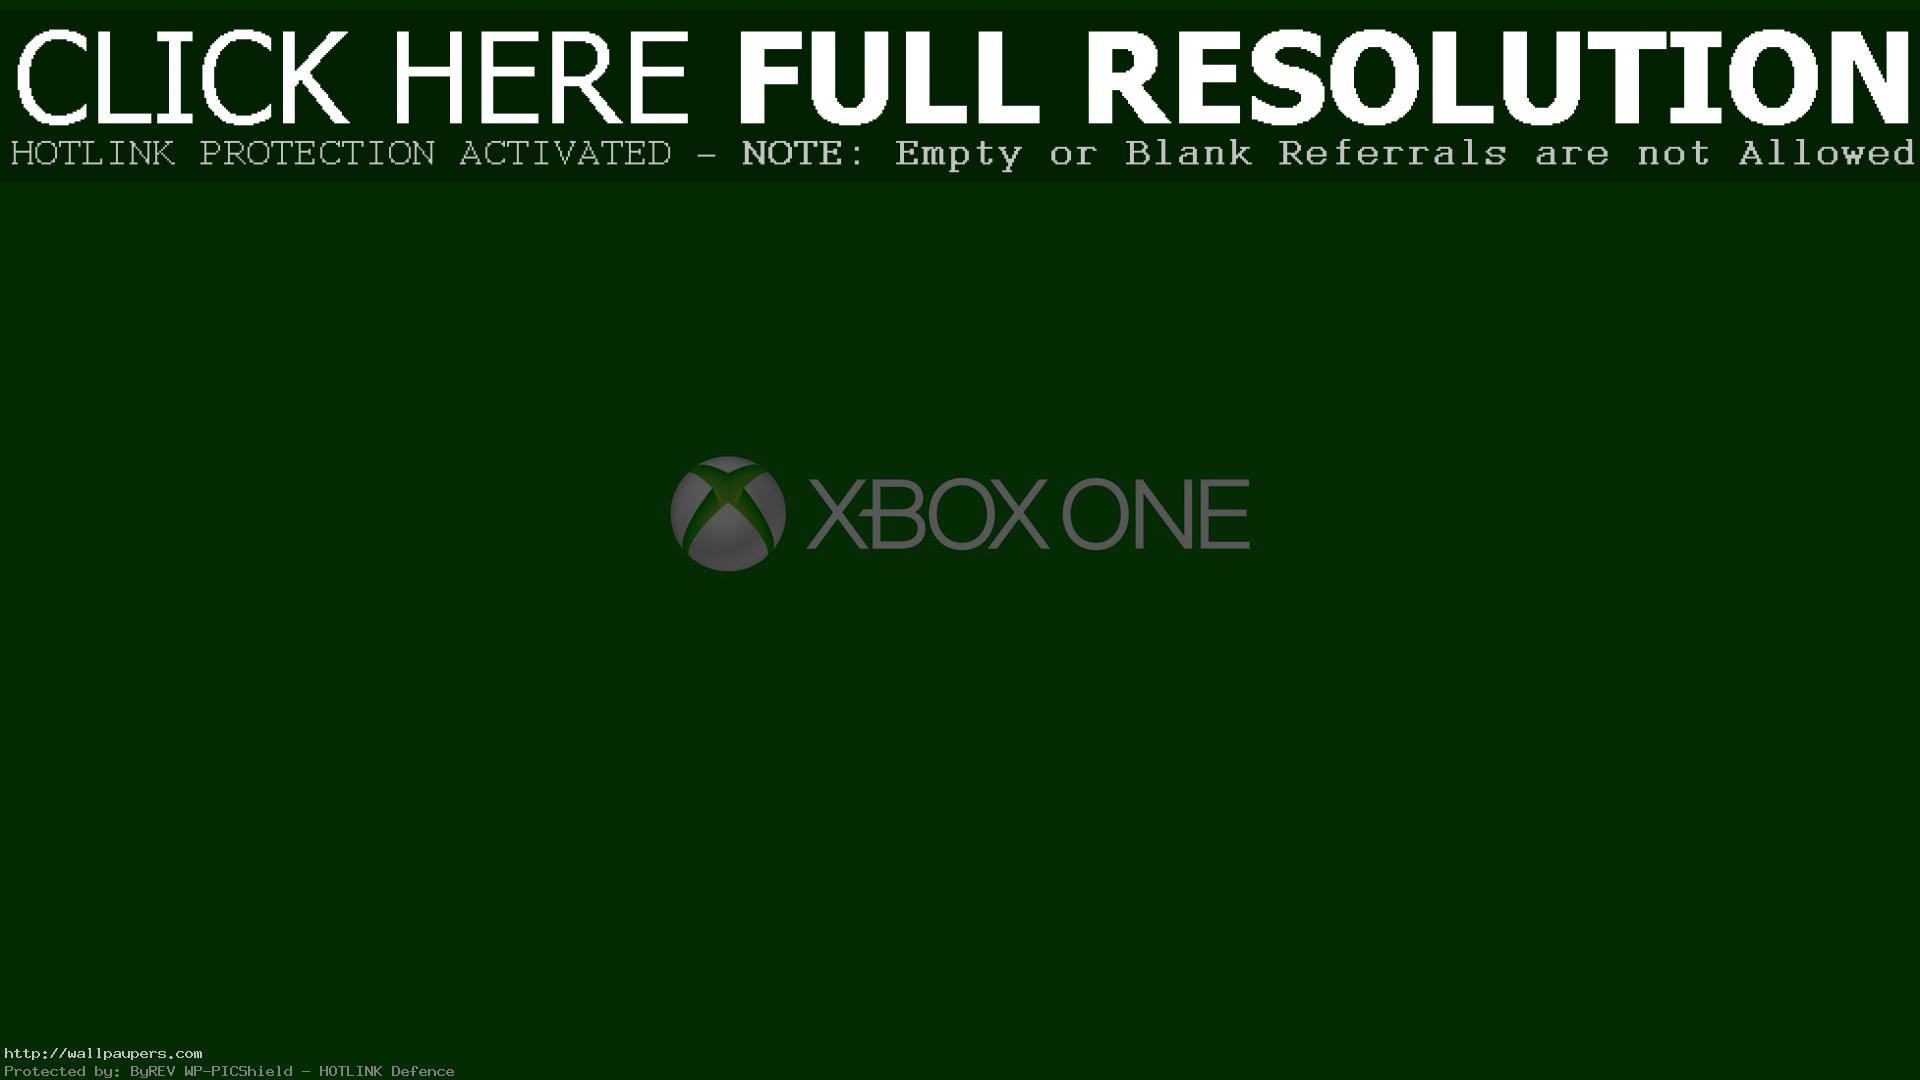 Xbox One Wallpaper | Free Xbox One | Microsoft | Gamers | free online games  |